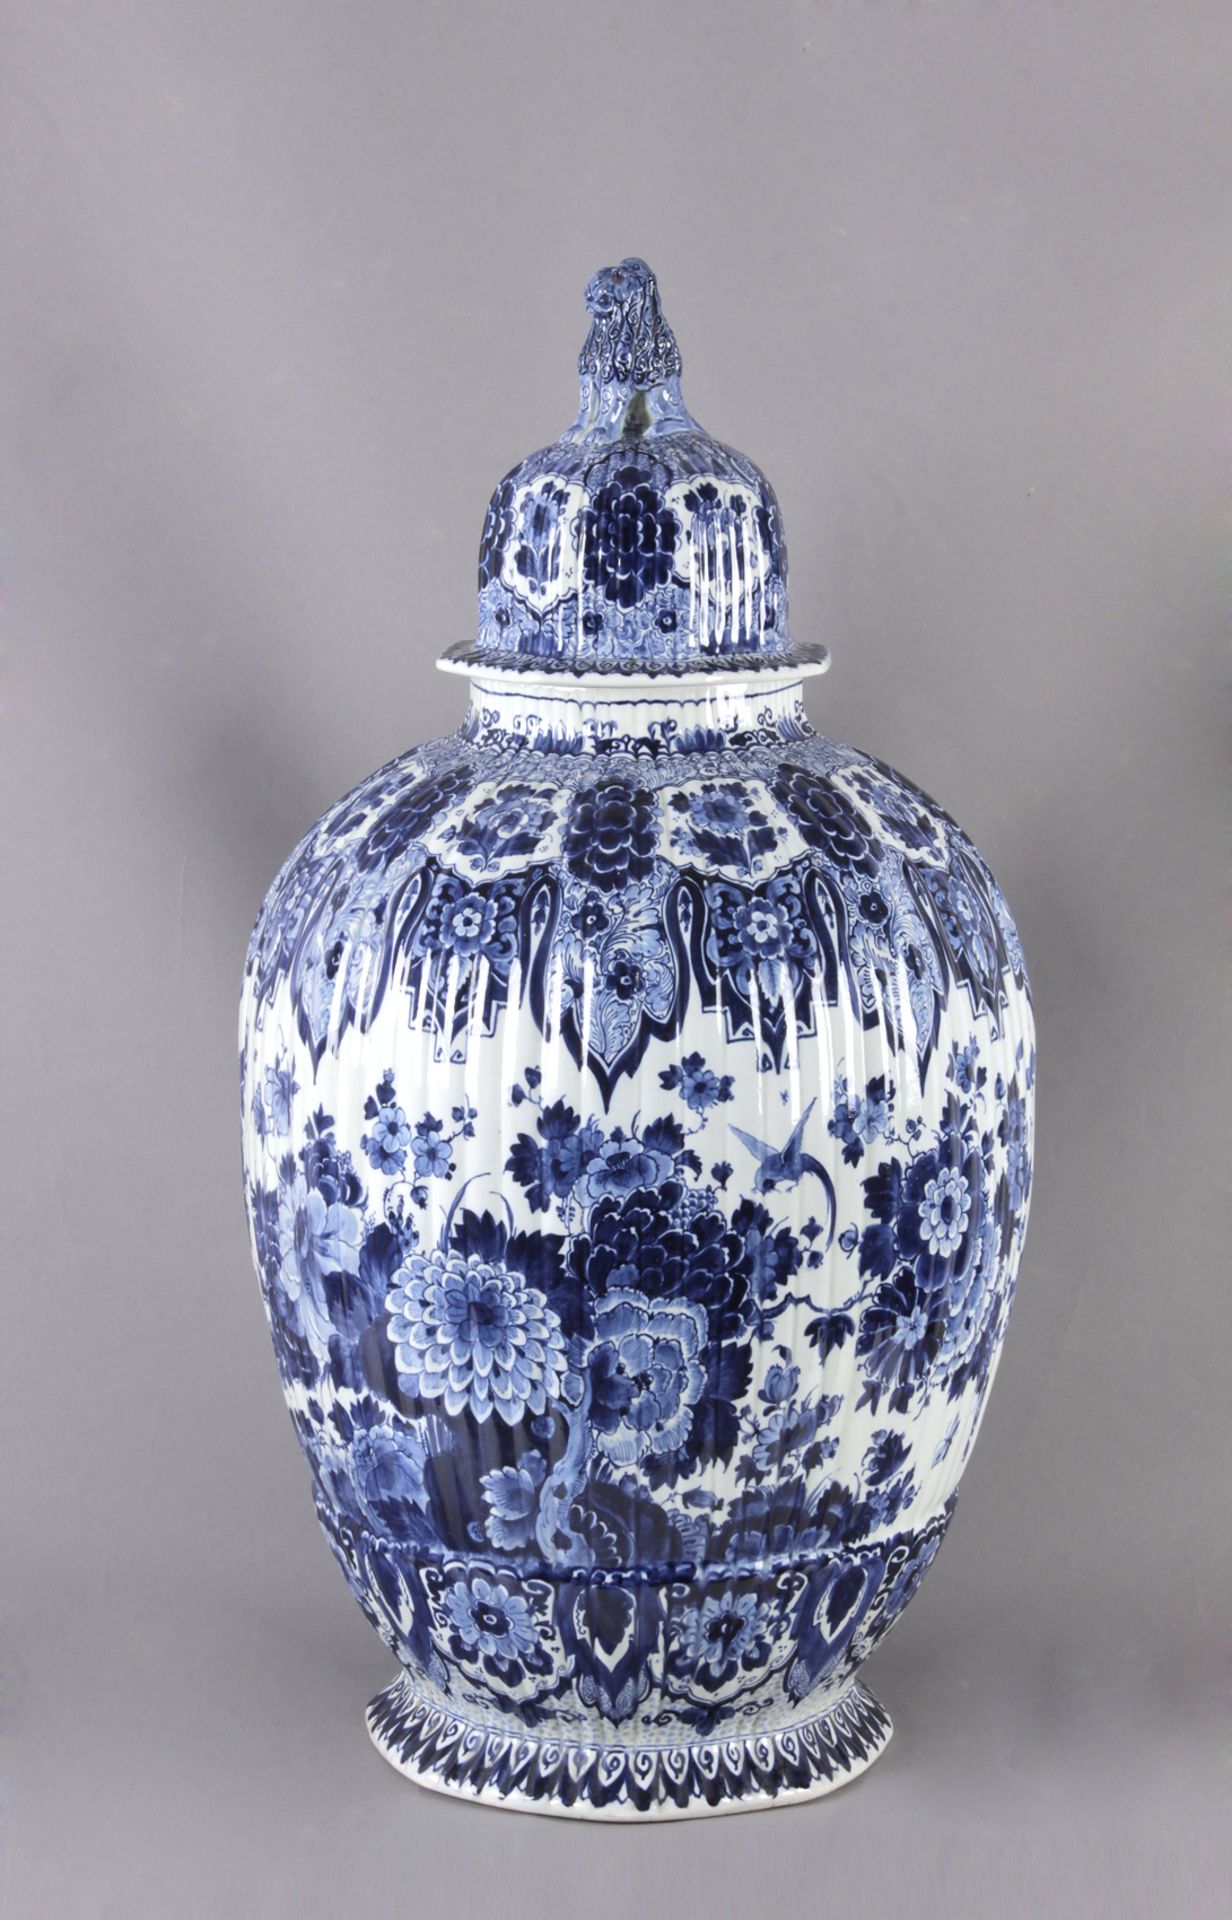 19th century Dutch vase and cover in Delft porcelain